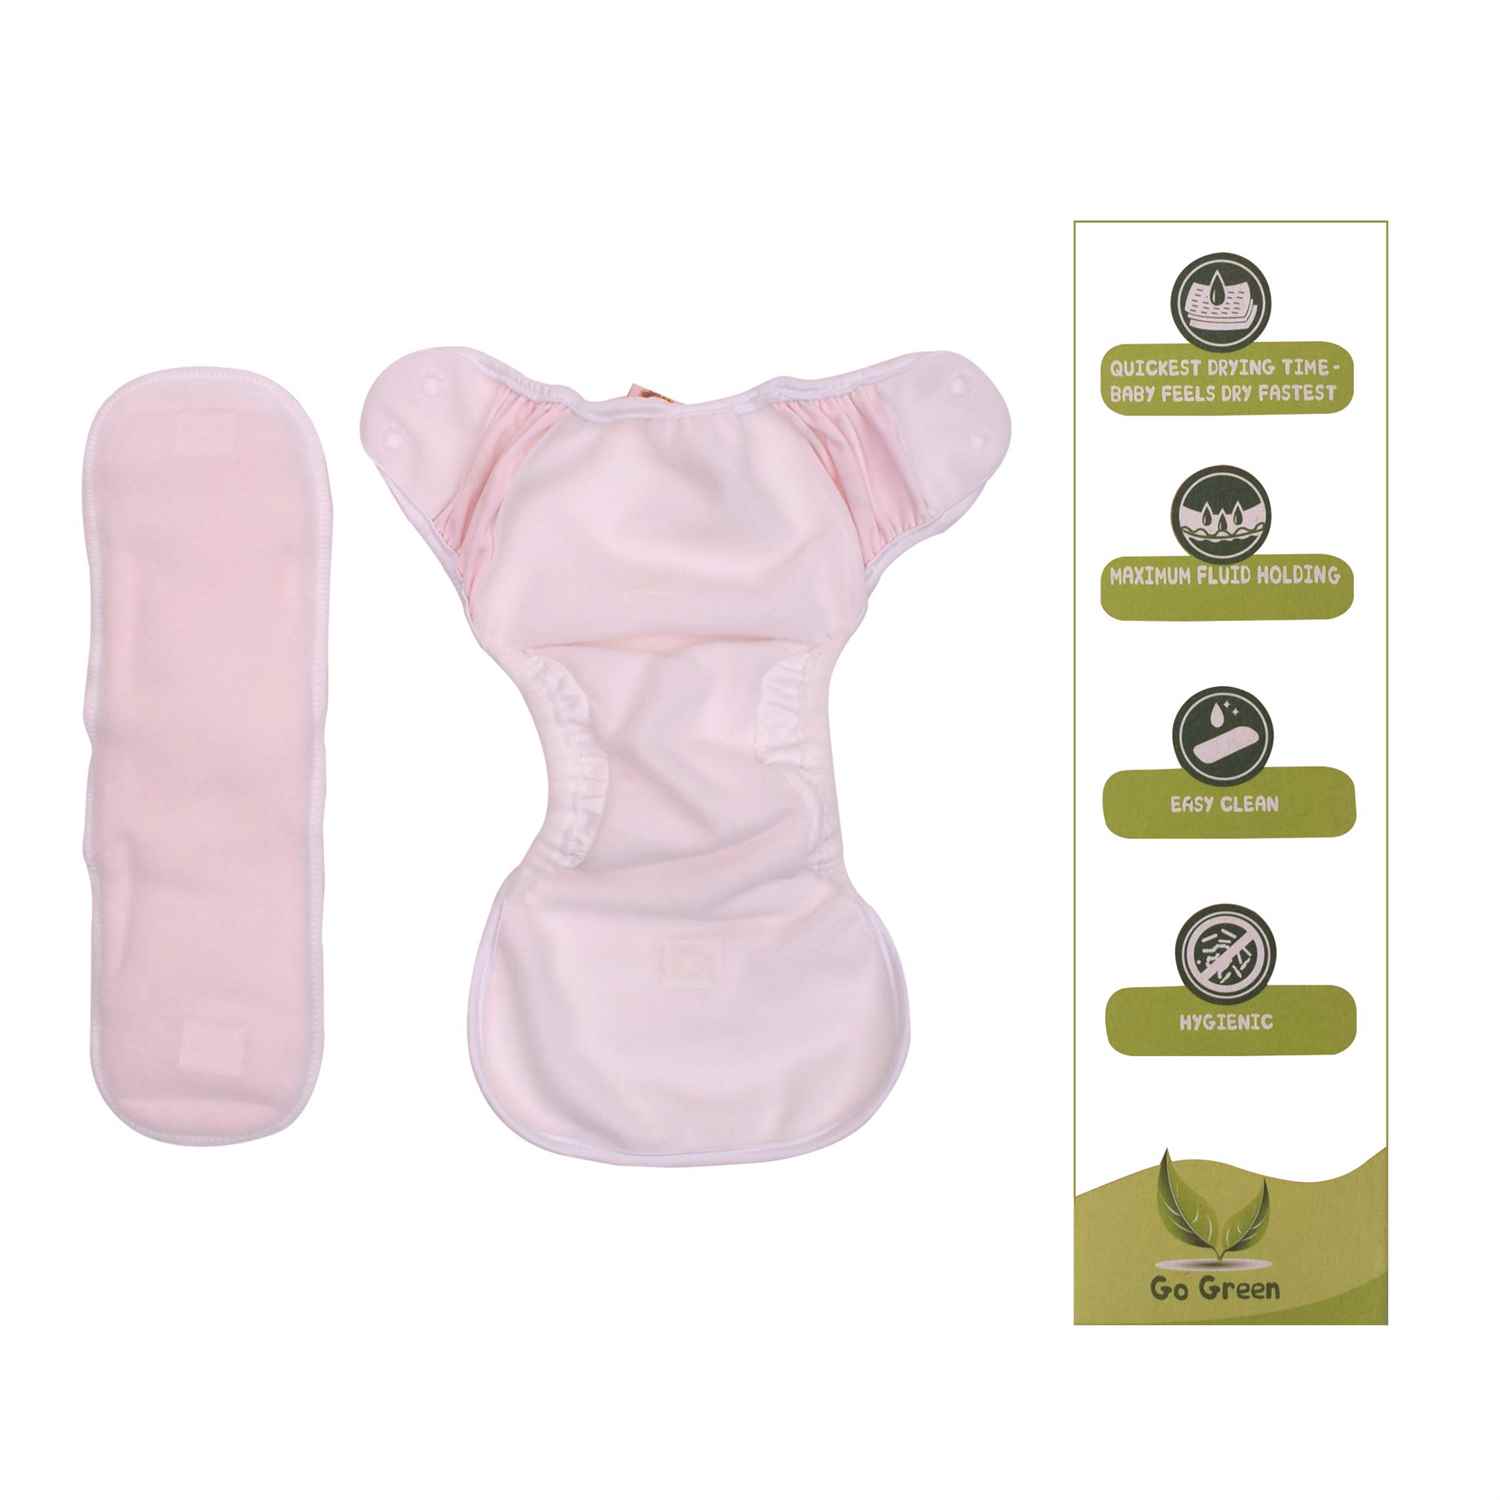 PAW PAW Baby Reusable Fabric Diaper with Pad, Size XL (10-14kg)-Pink